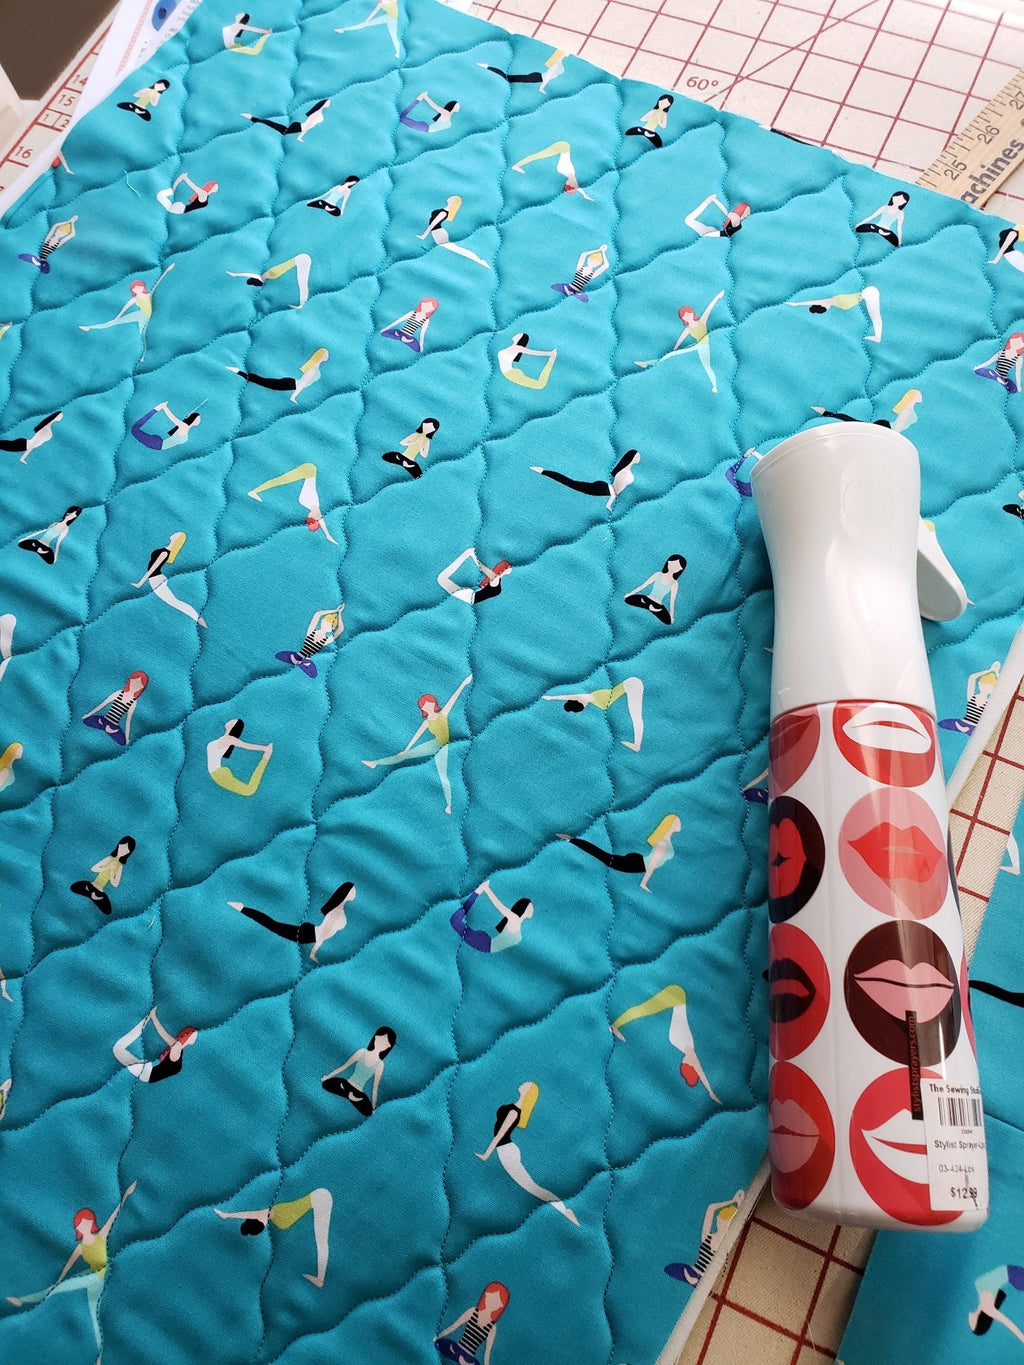 A great tip for using Diagonal Seam Tape and a new project - The Crafty  Quilter